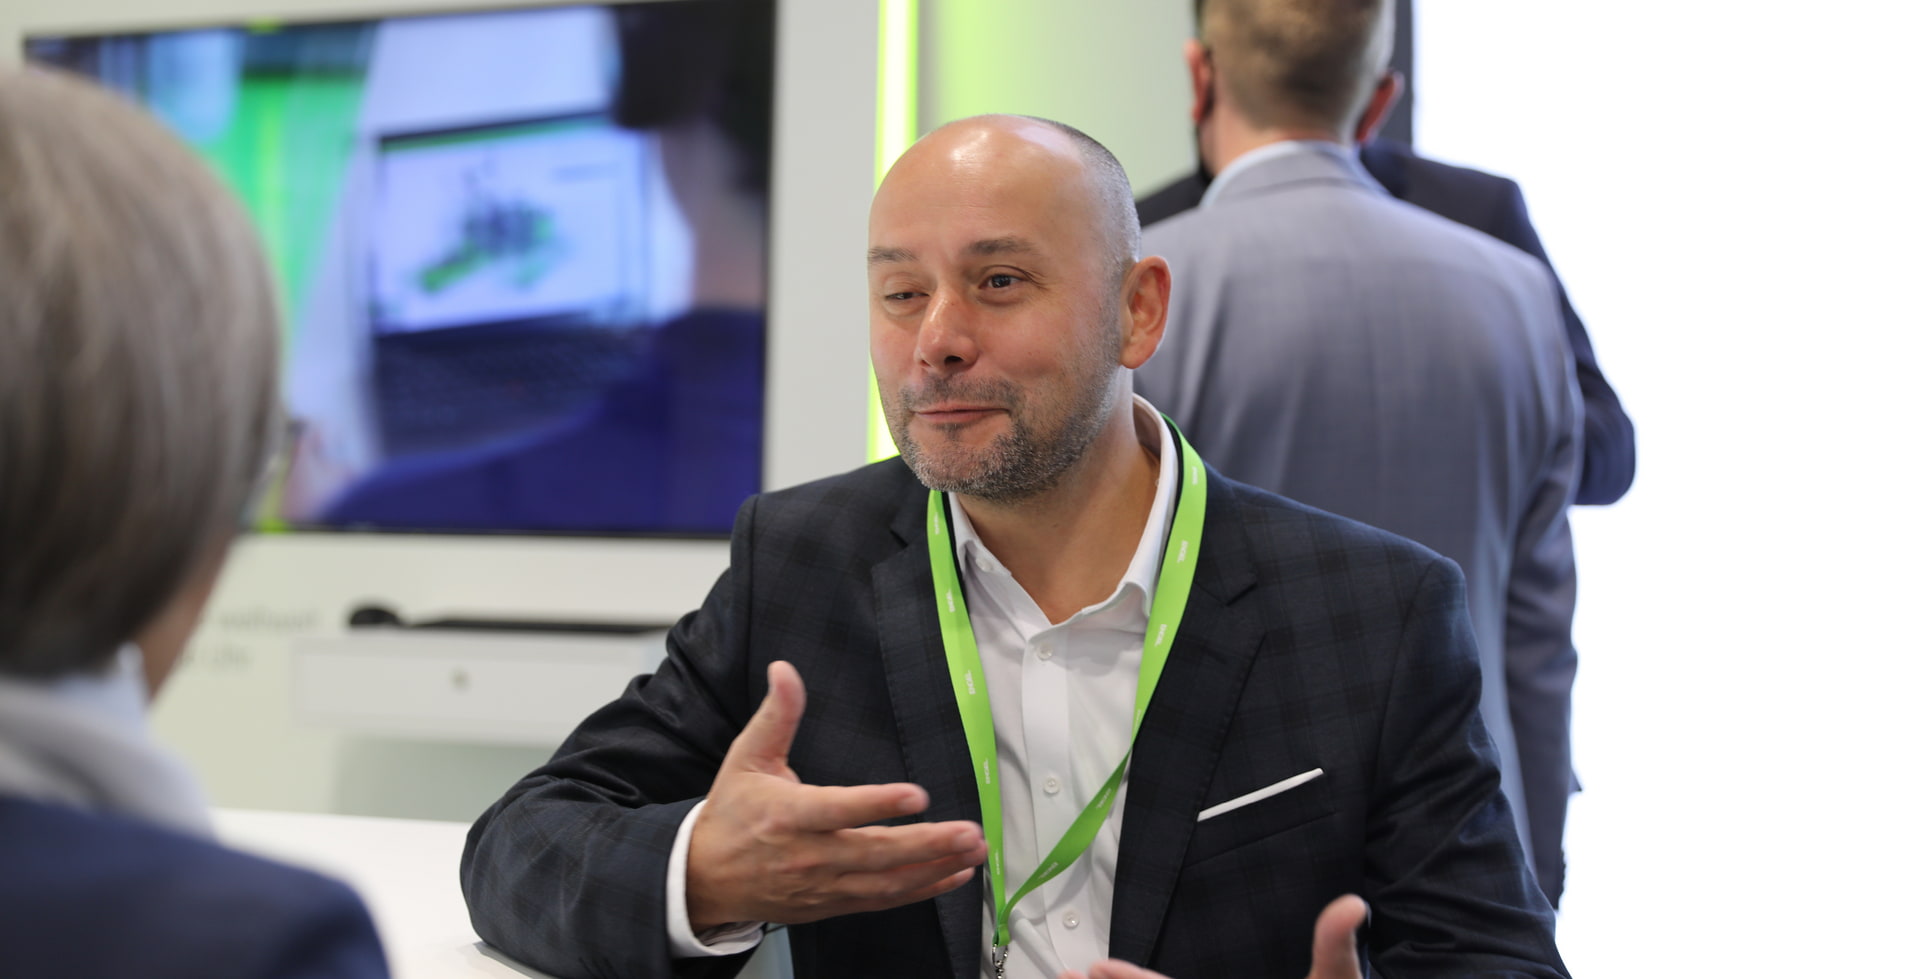 Picture shows Head of Digital Solutions at ENGEL Hannes Zach in interview